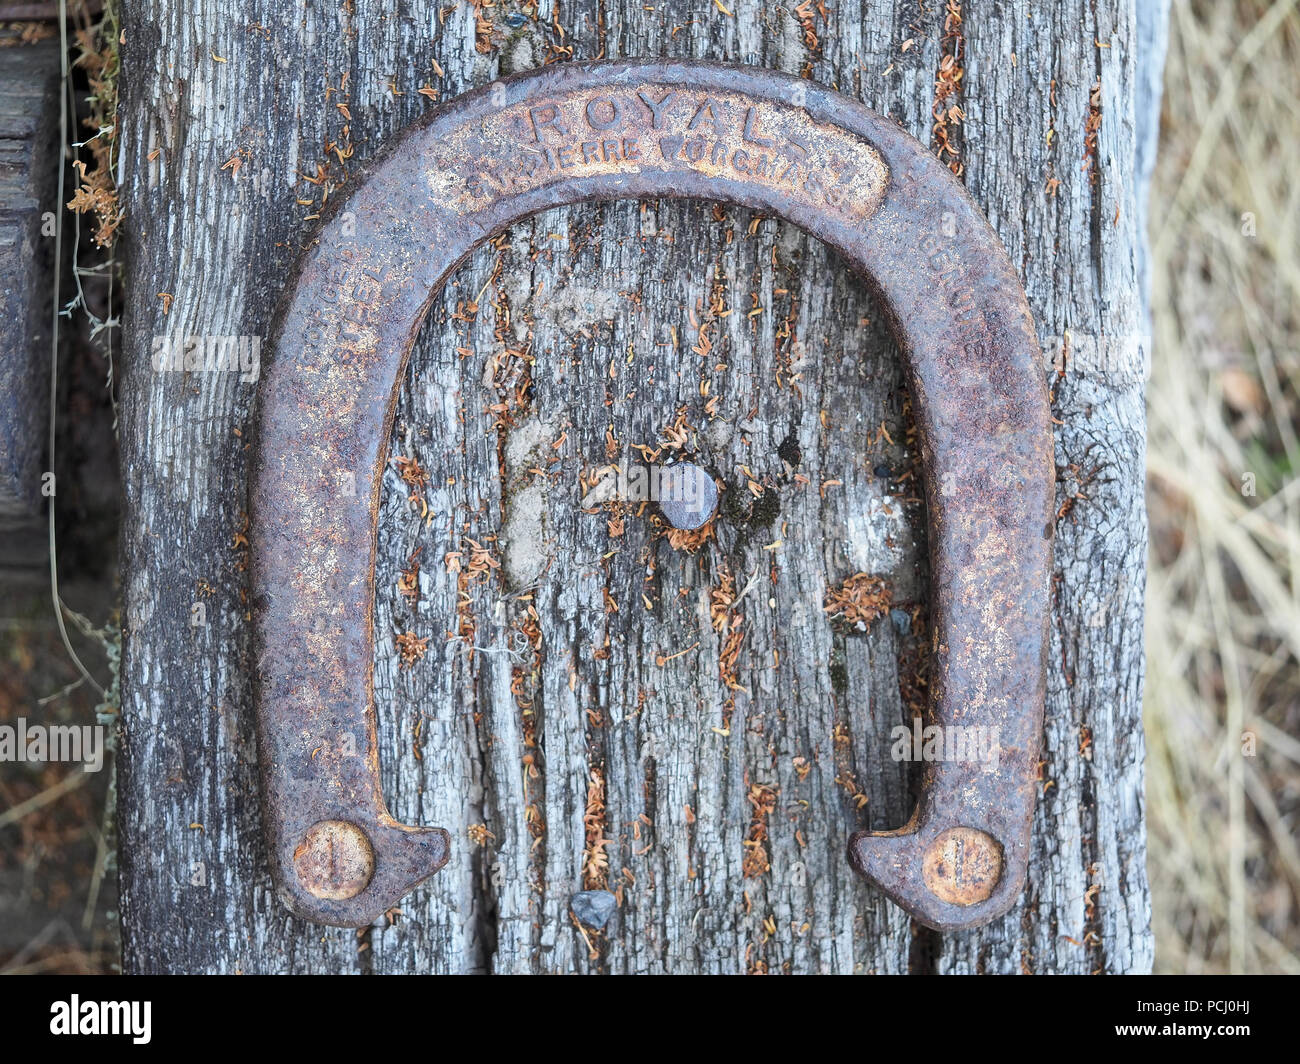 Old and rusty pitching horseshoe Stock Photo